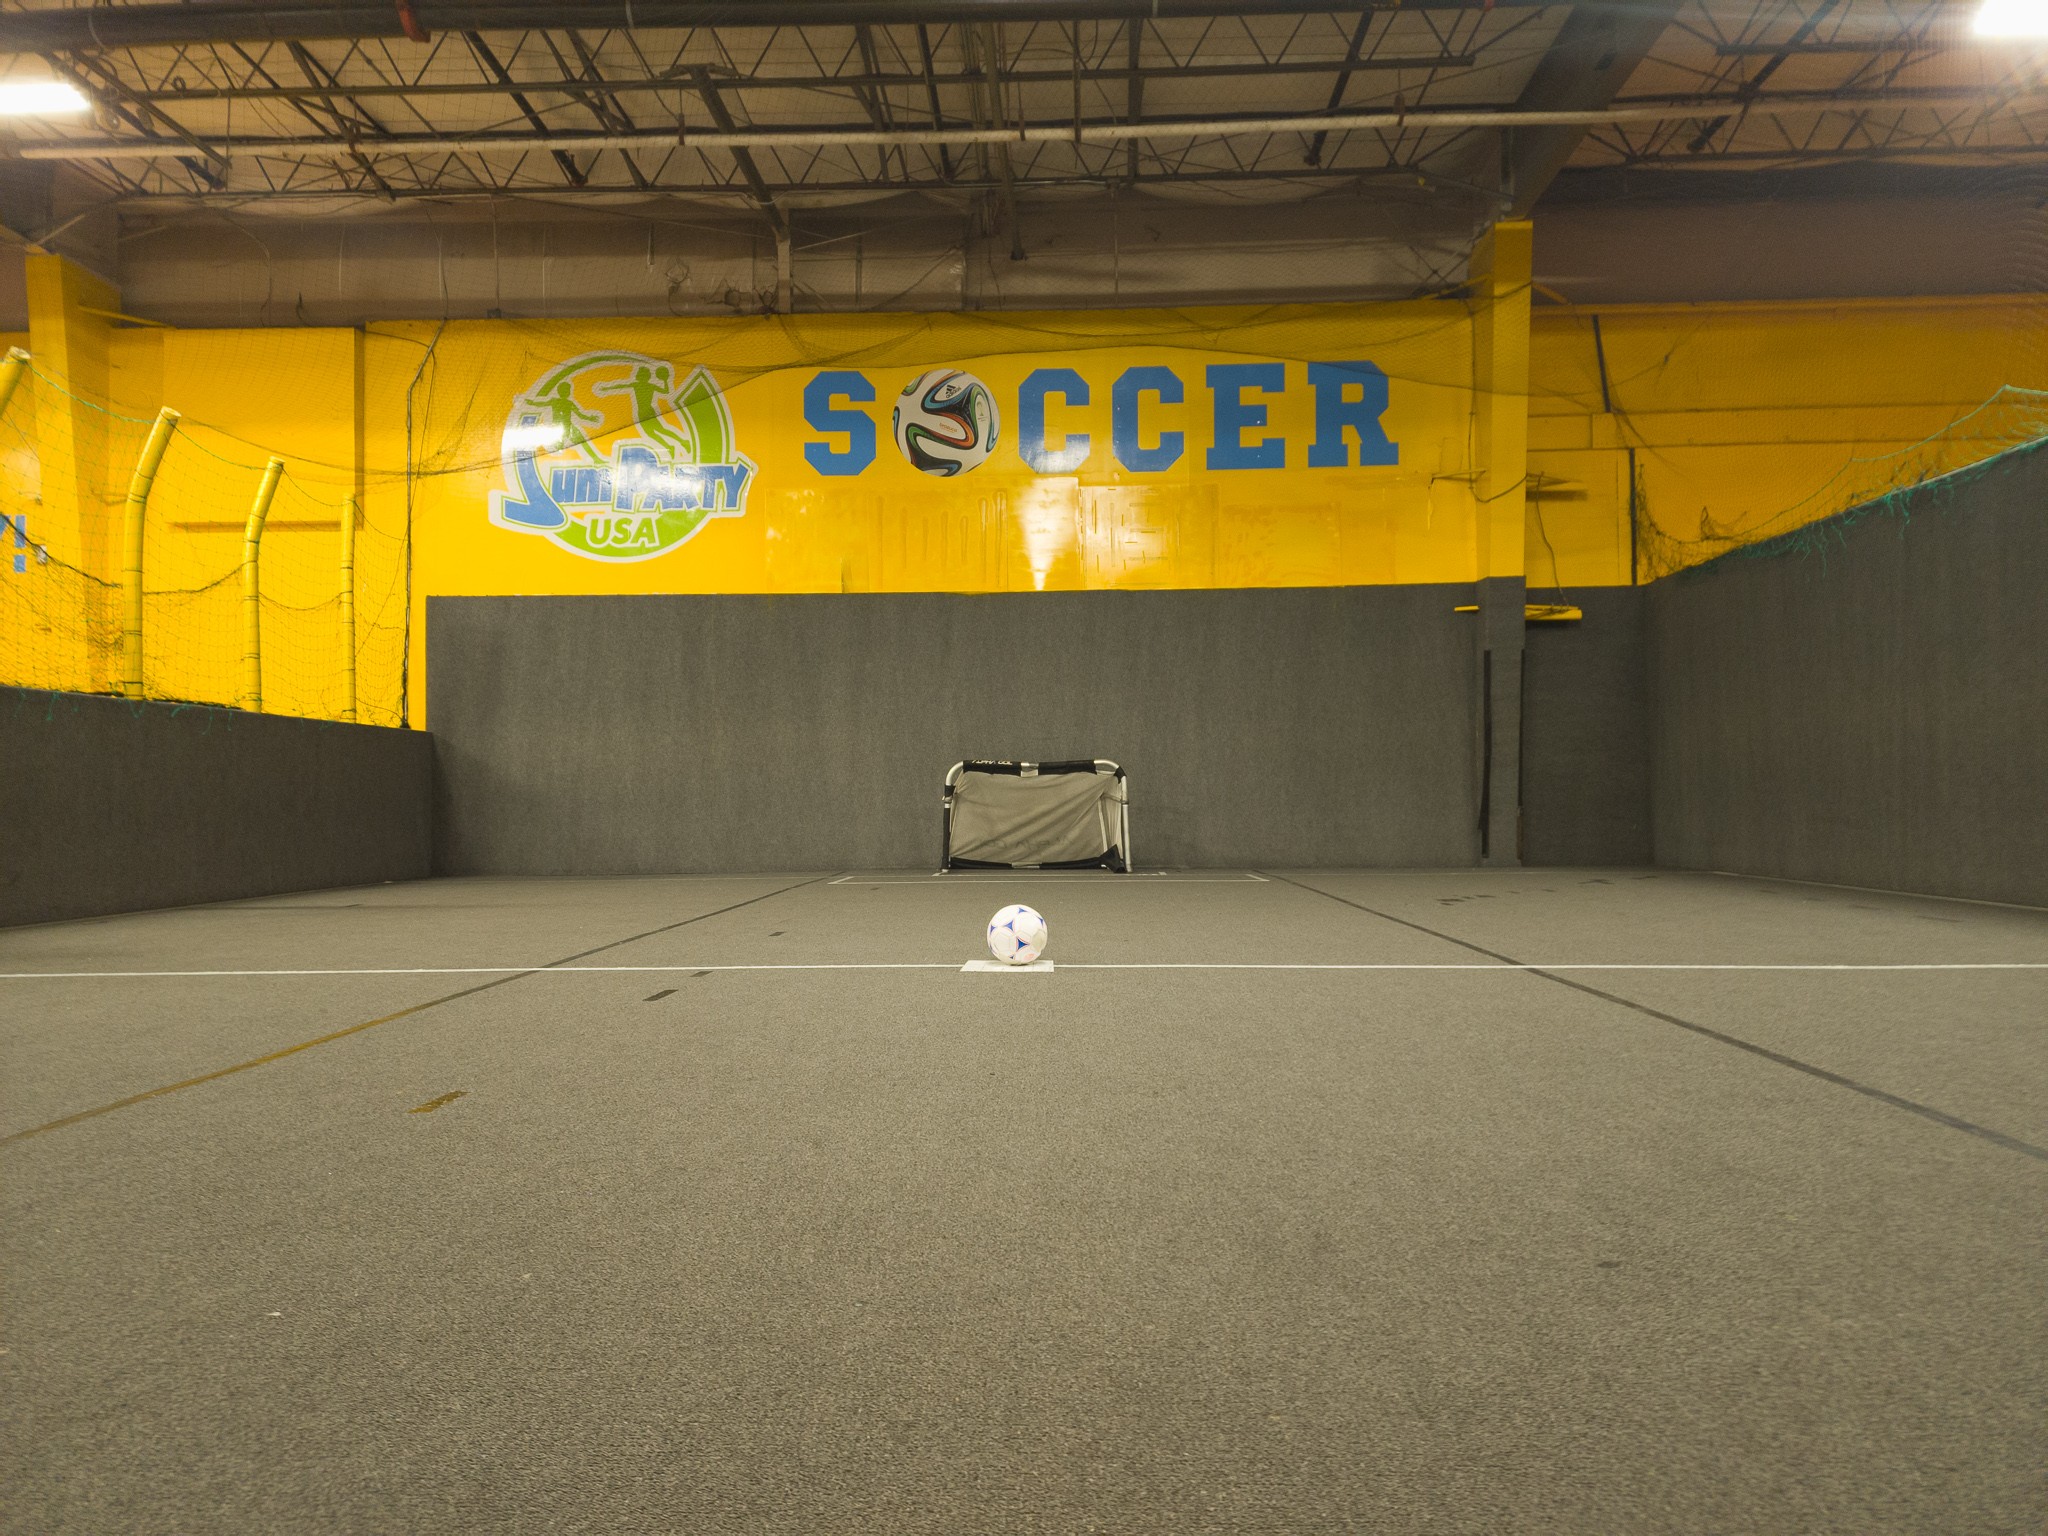 Jump Party USA has an indoor soccer field with soccer balls. Adults and kids can safely play within a netted court